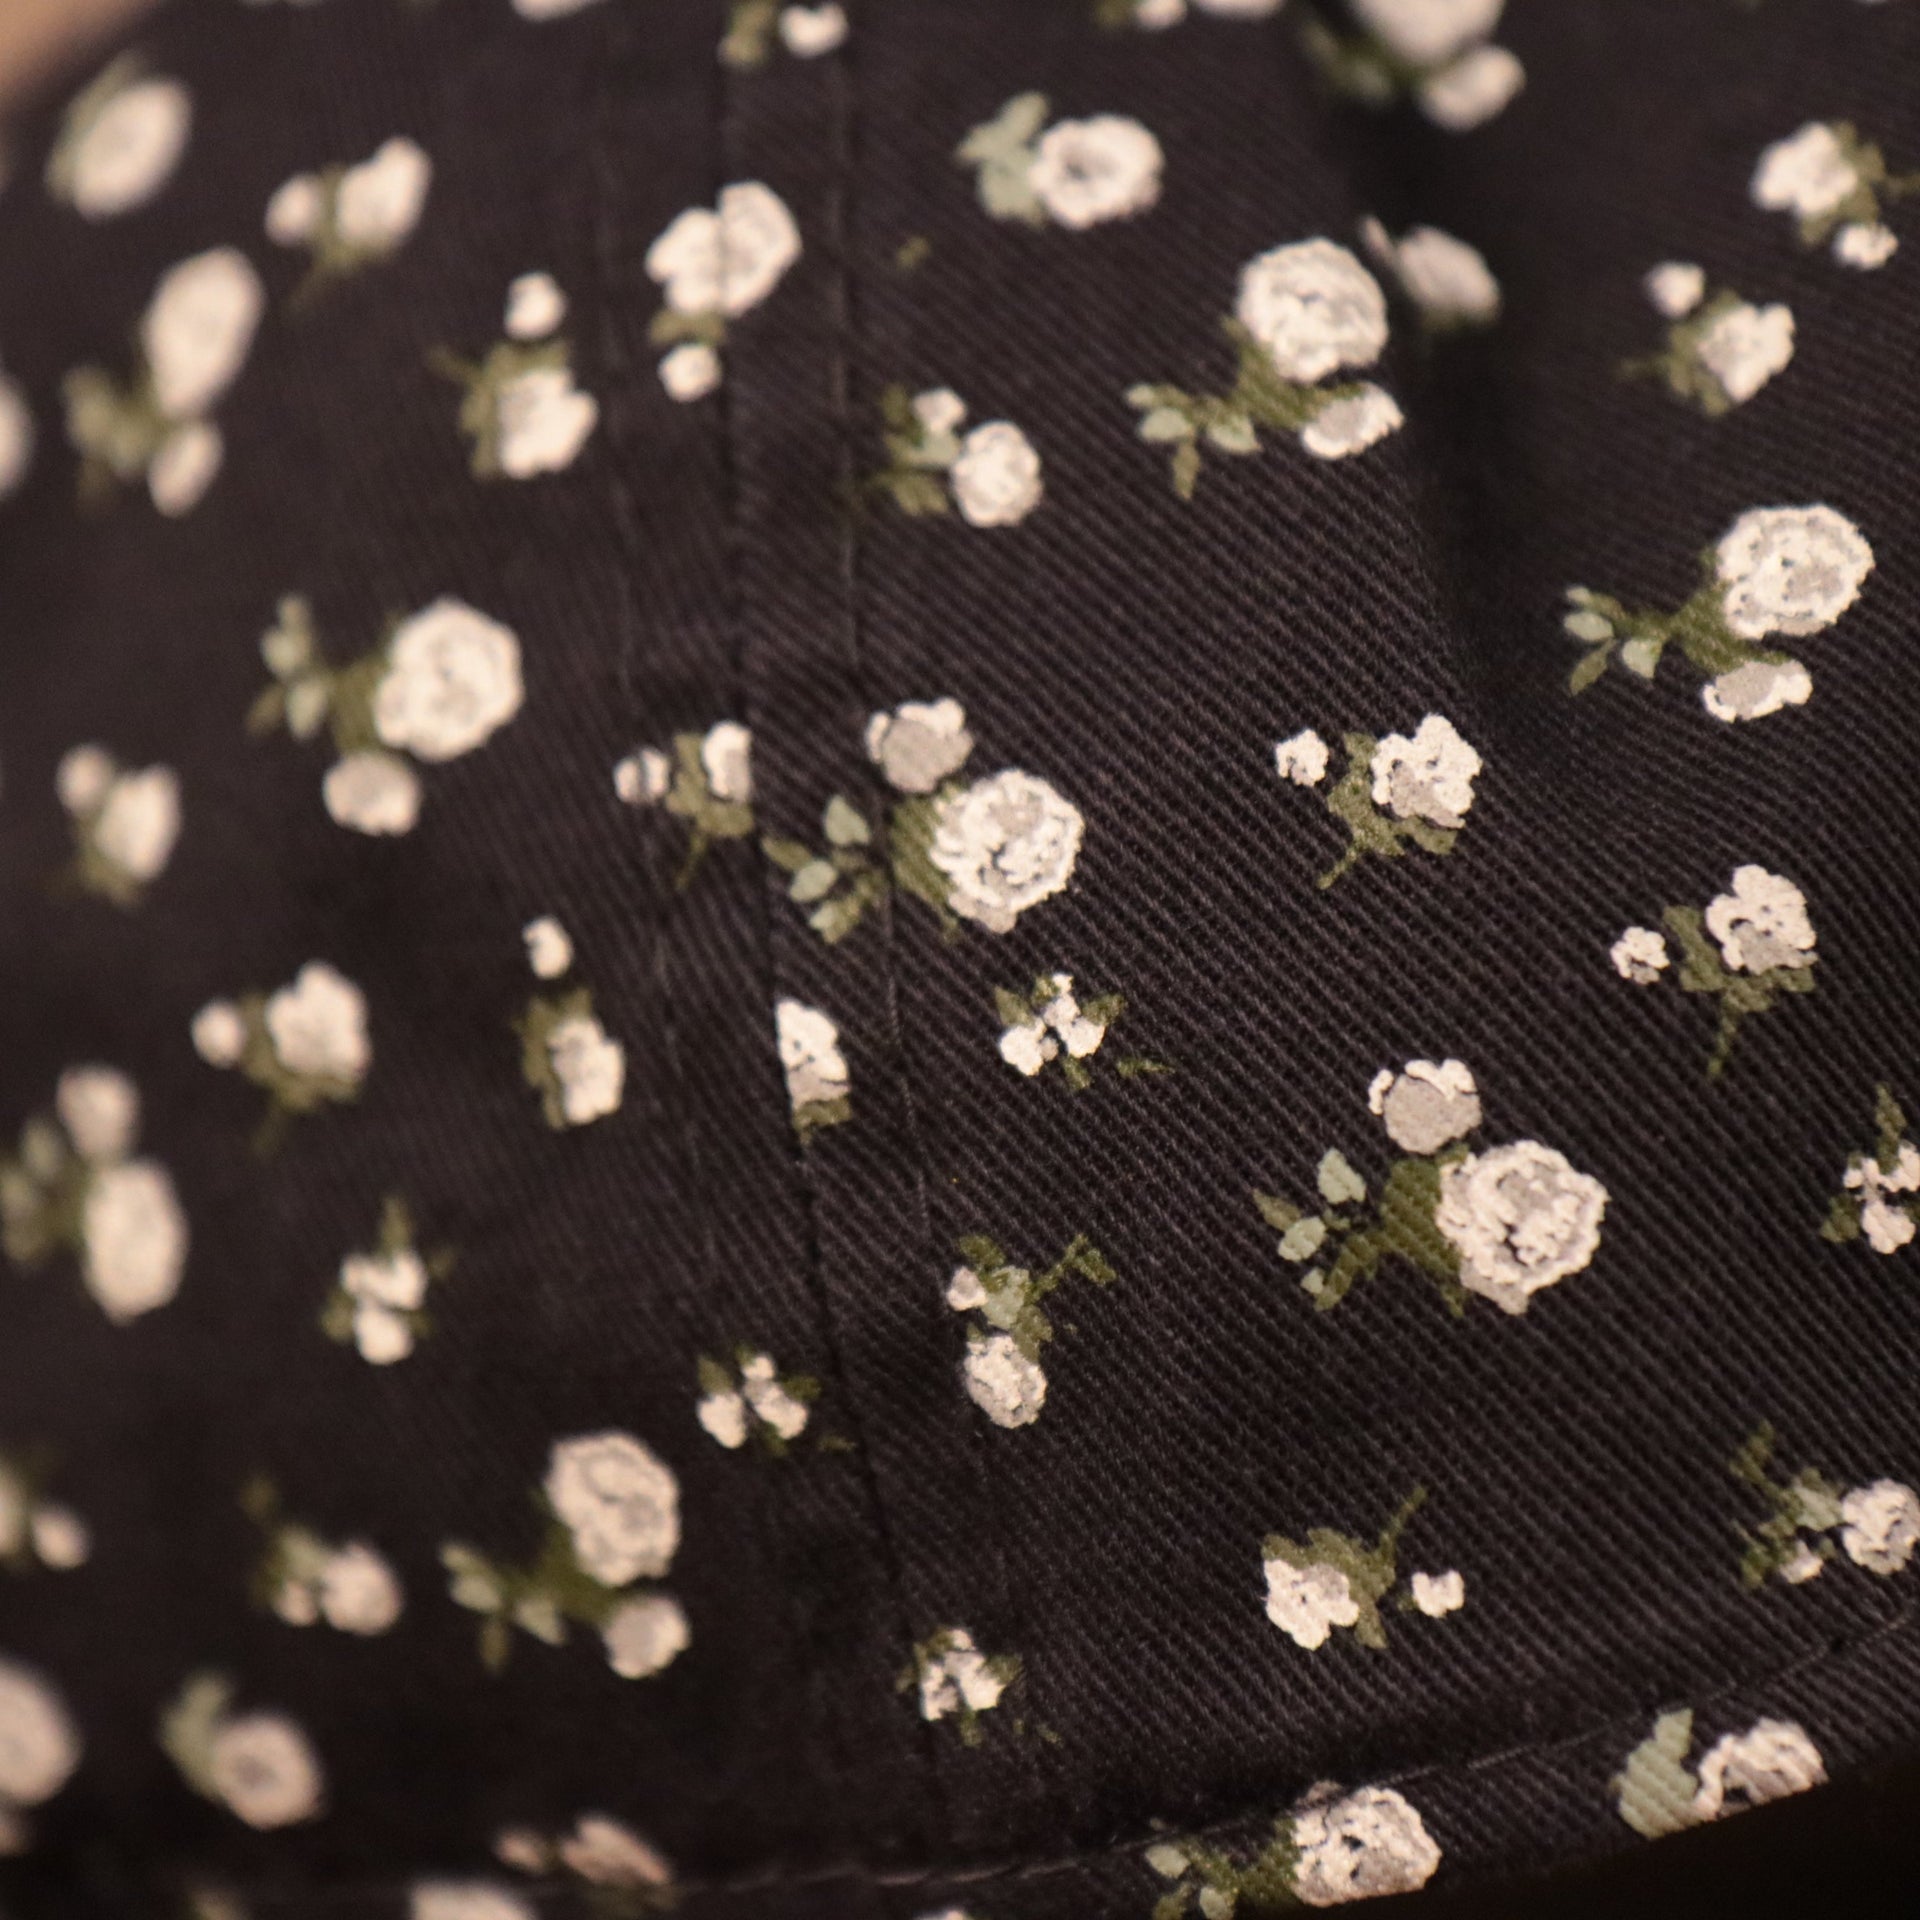 A closeup of the floral pattern on the navy blue floral baseball cap for the New York Yankees.